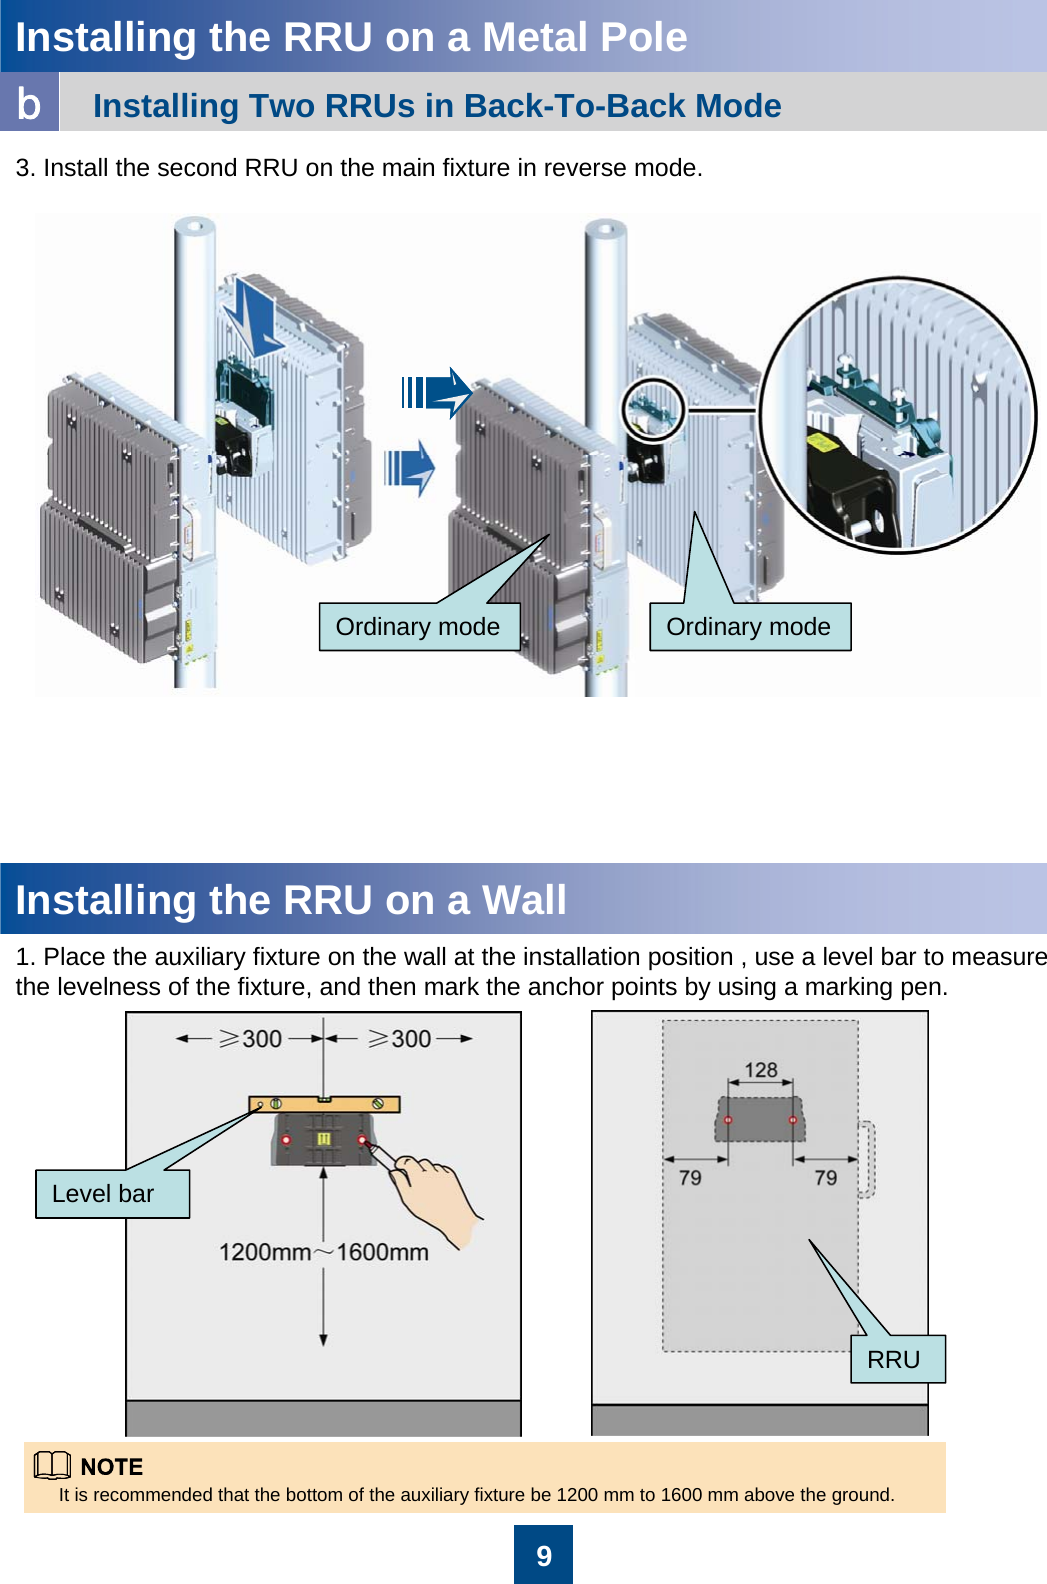 9Installing the RRU on a Metal PoleInstalling Two RRUs in Back-To-Back Modeb3. Install the second RRU on the main fixture in reverse mode.Ordinary mode Ordinary modeInstalling the RRU on a Wall1. Place the auxiliary fixture on the wall at the installation position , use a level bar to measure the levelness of the fixture, and then mark the anchor points by using a marking pen.It is recommended that the bottom of the auxiliary fixture be 1200 mm to 1600 mm above the ground.Level barRRU